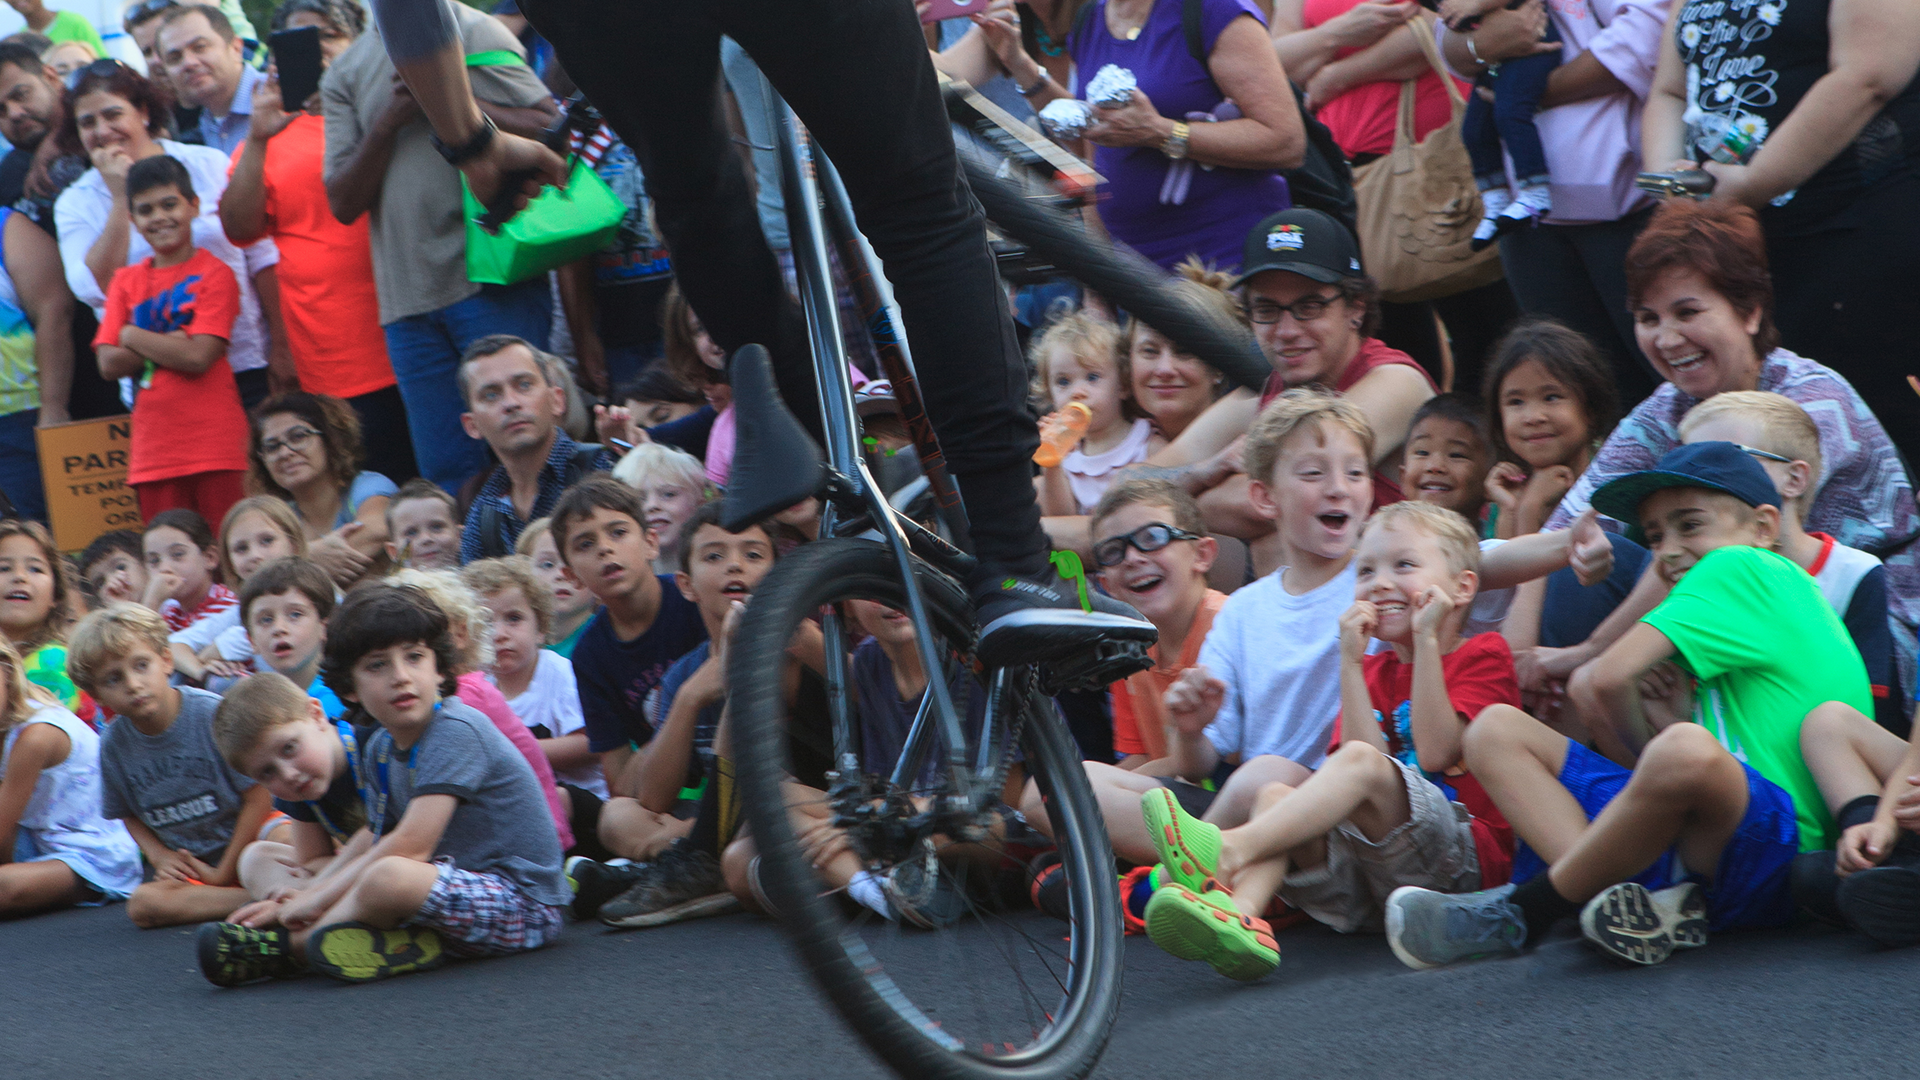 FRONT ROW ACTION! Pro Mountain Bike athlete demonstrates some flat-ground skills at National Night Out in Summit New Jersey